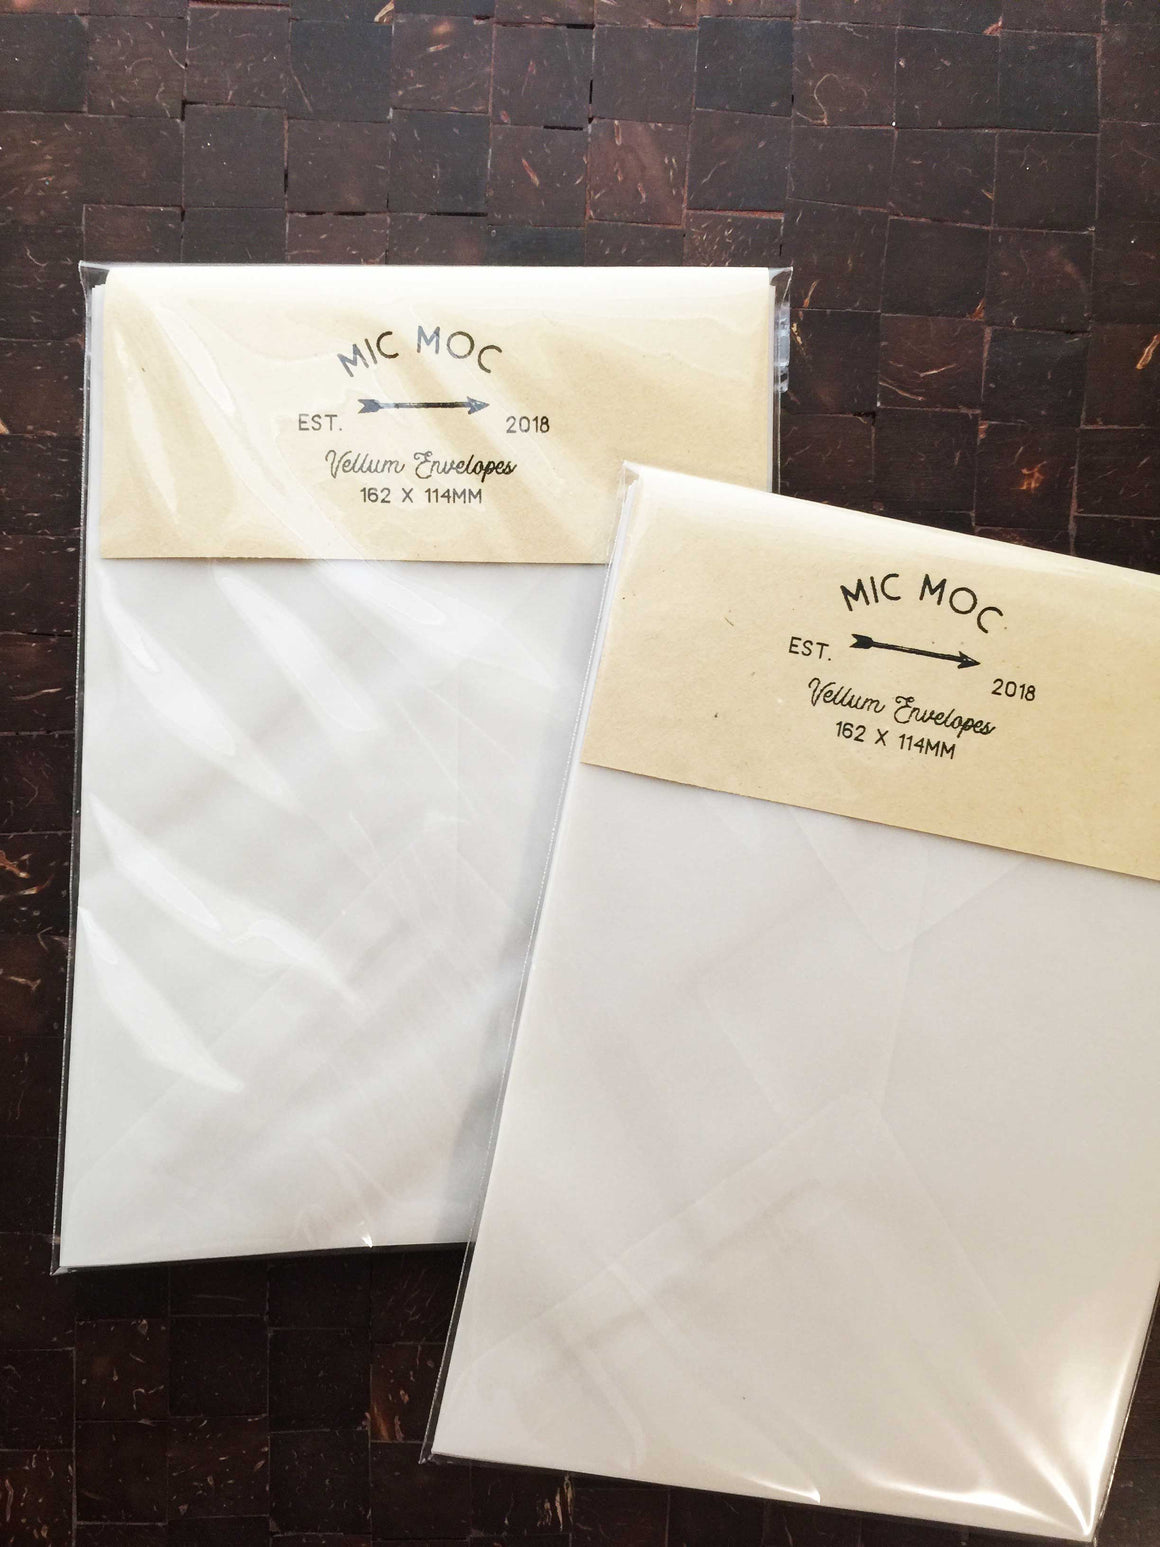 Vellum Envelopes - 10 pc Pack by micmoc.com at Mic Moc Curated Emporium